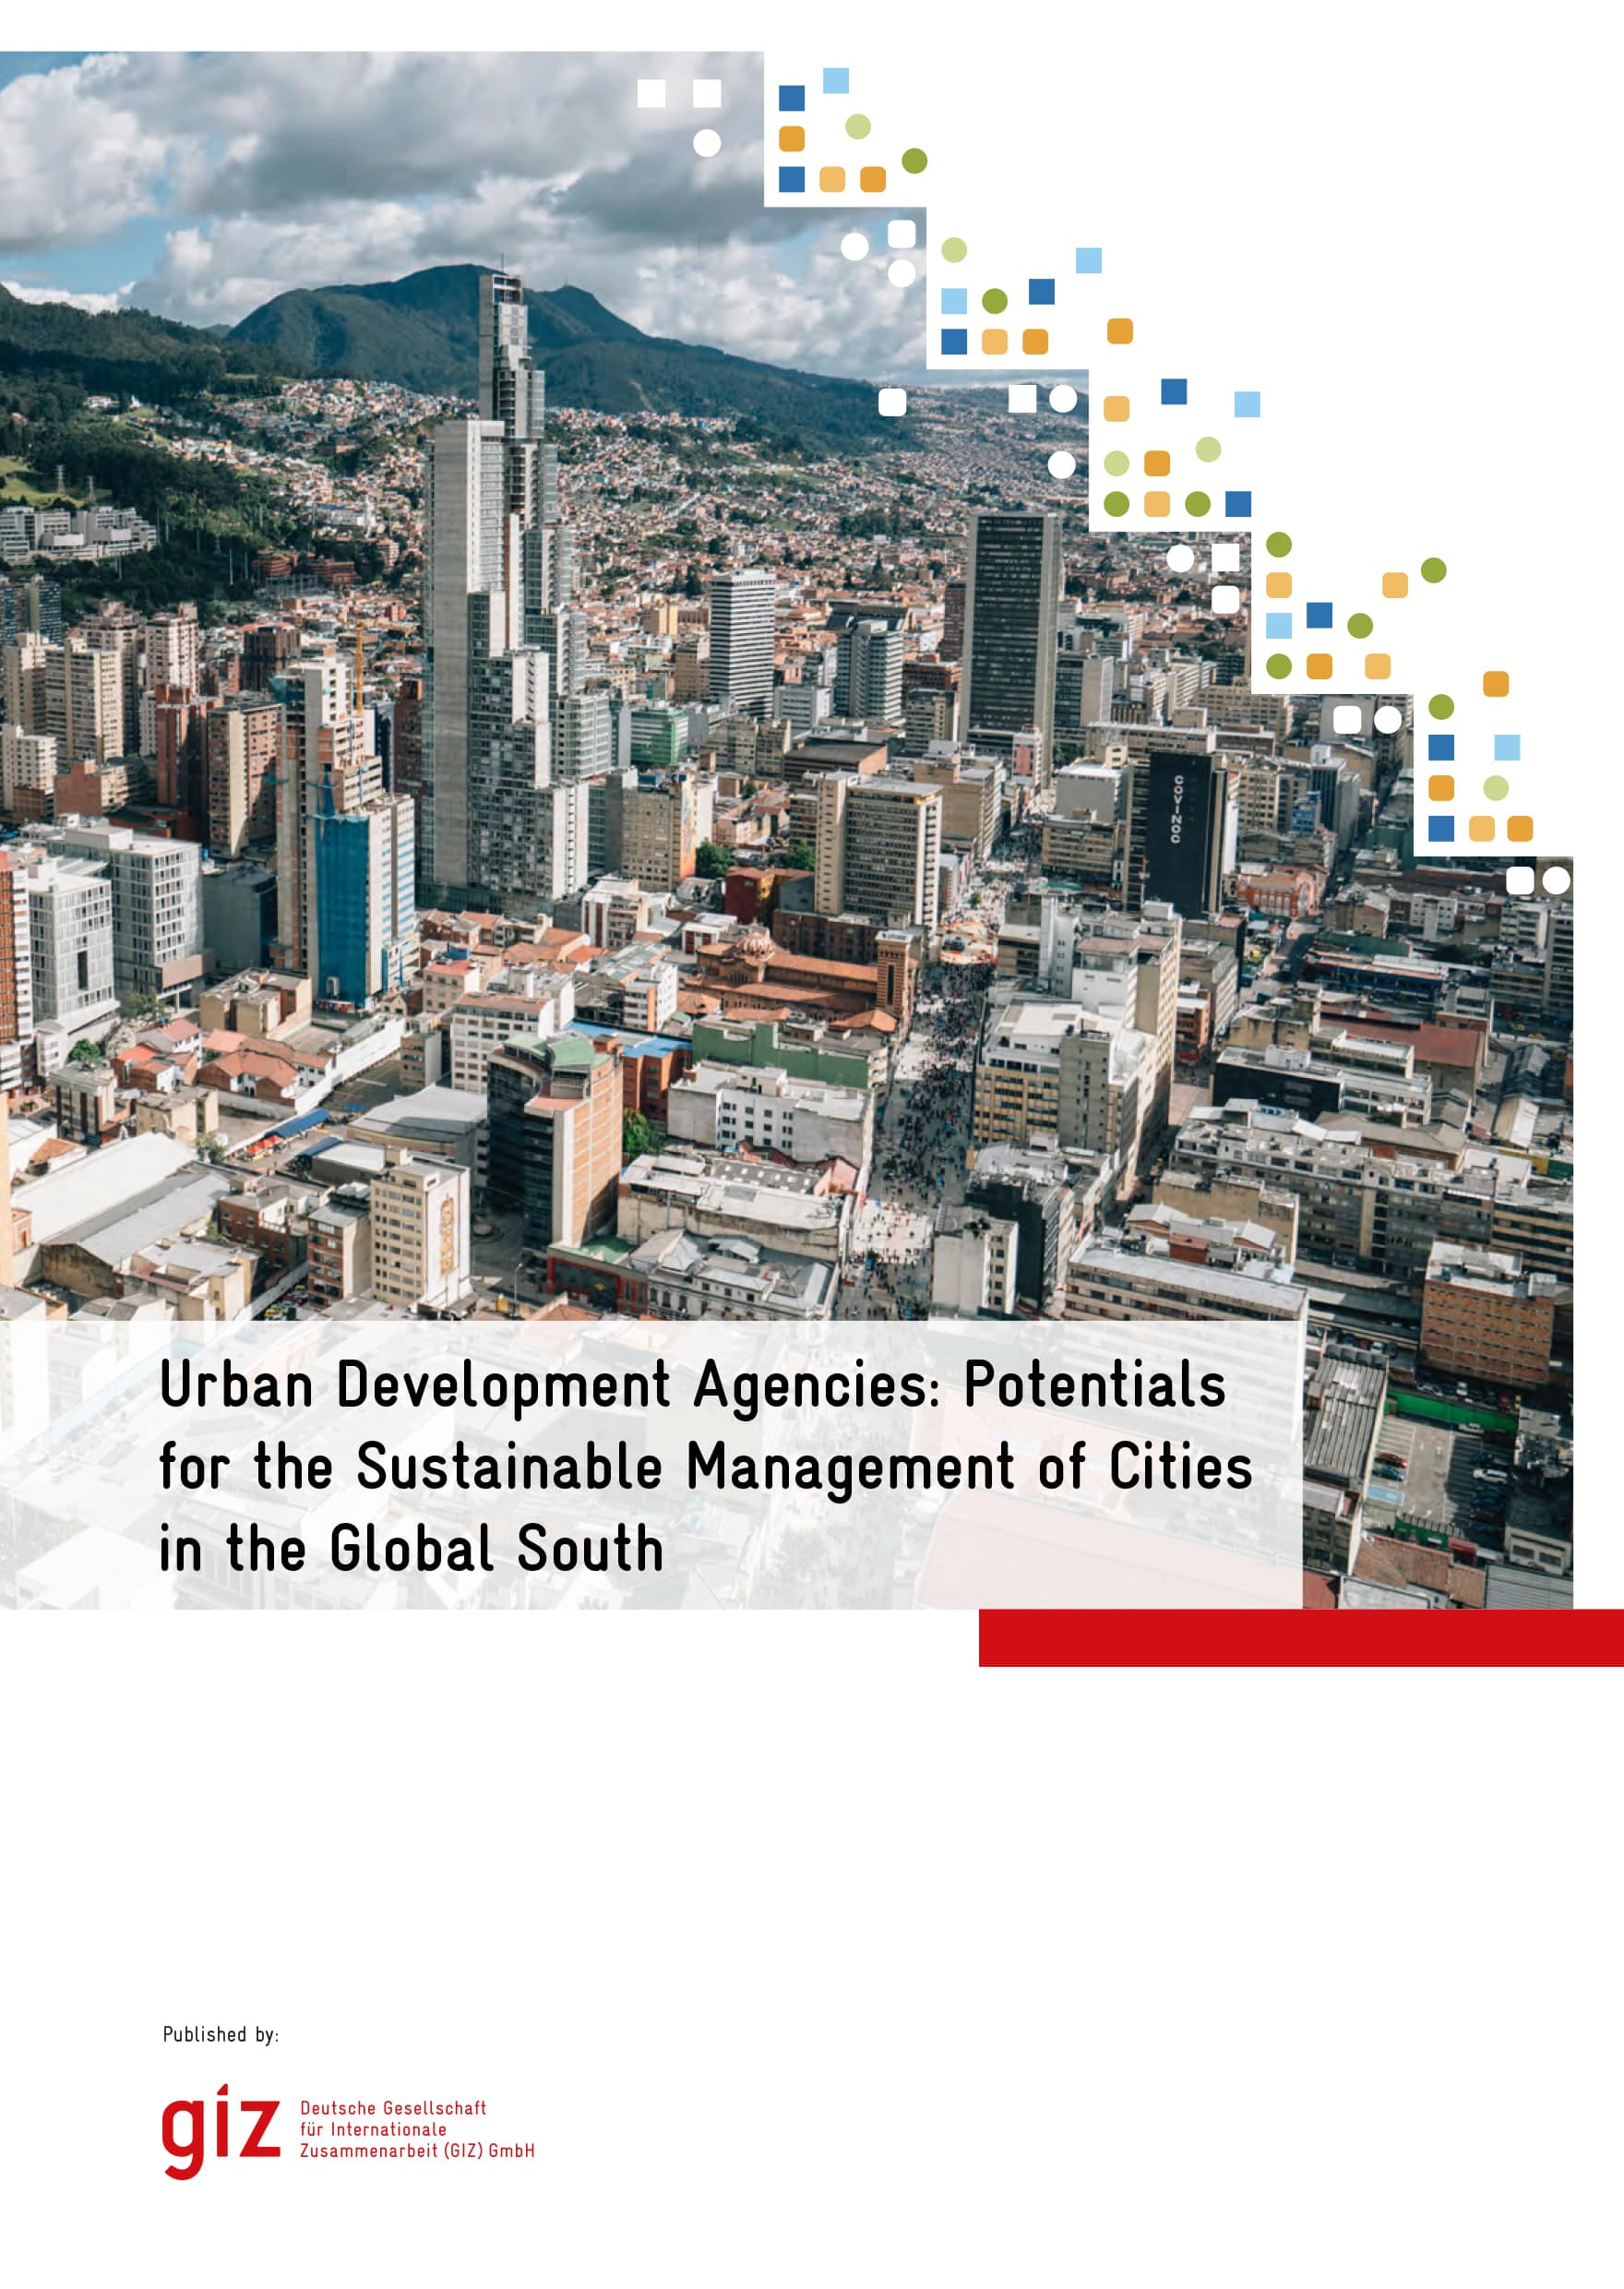 Urban Development Agencies: Potentials for the Sustainable Management of Cities in the Global South